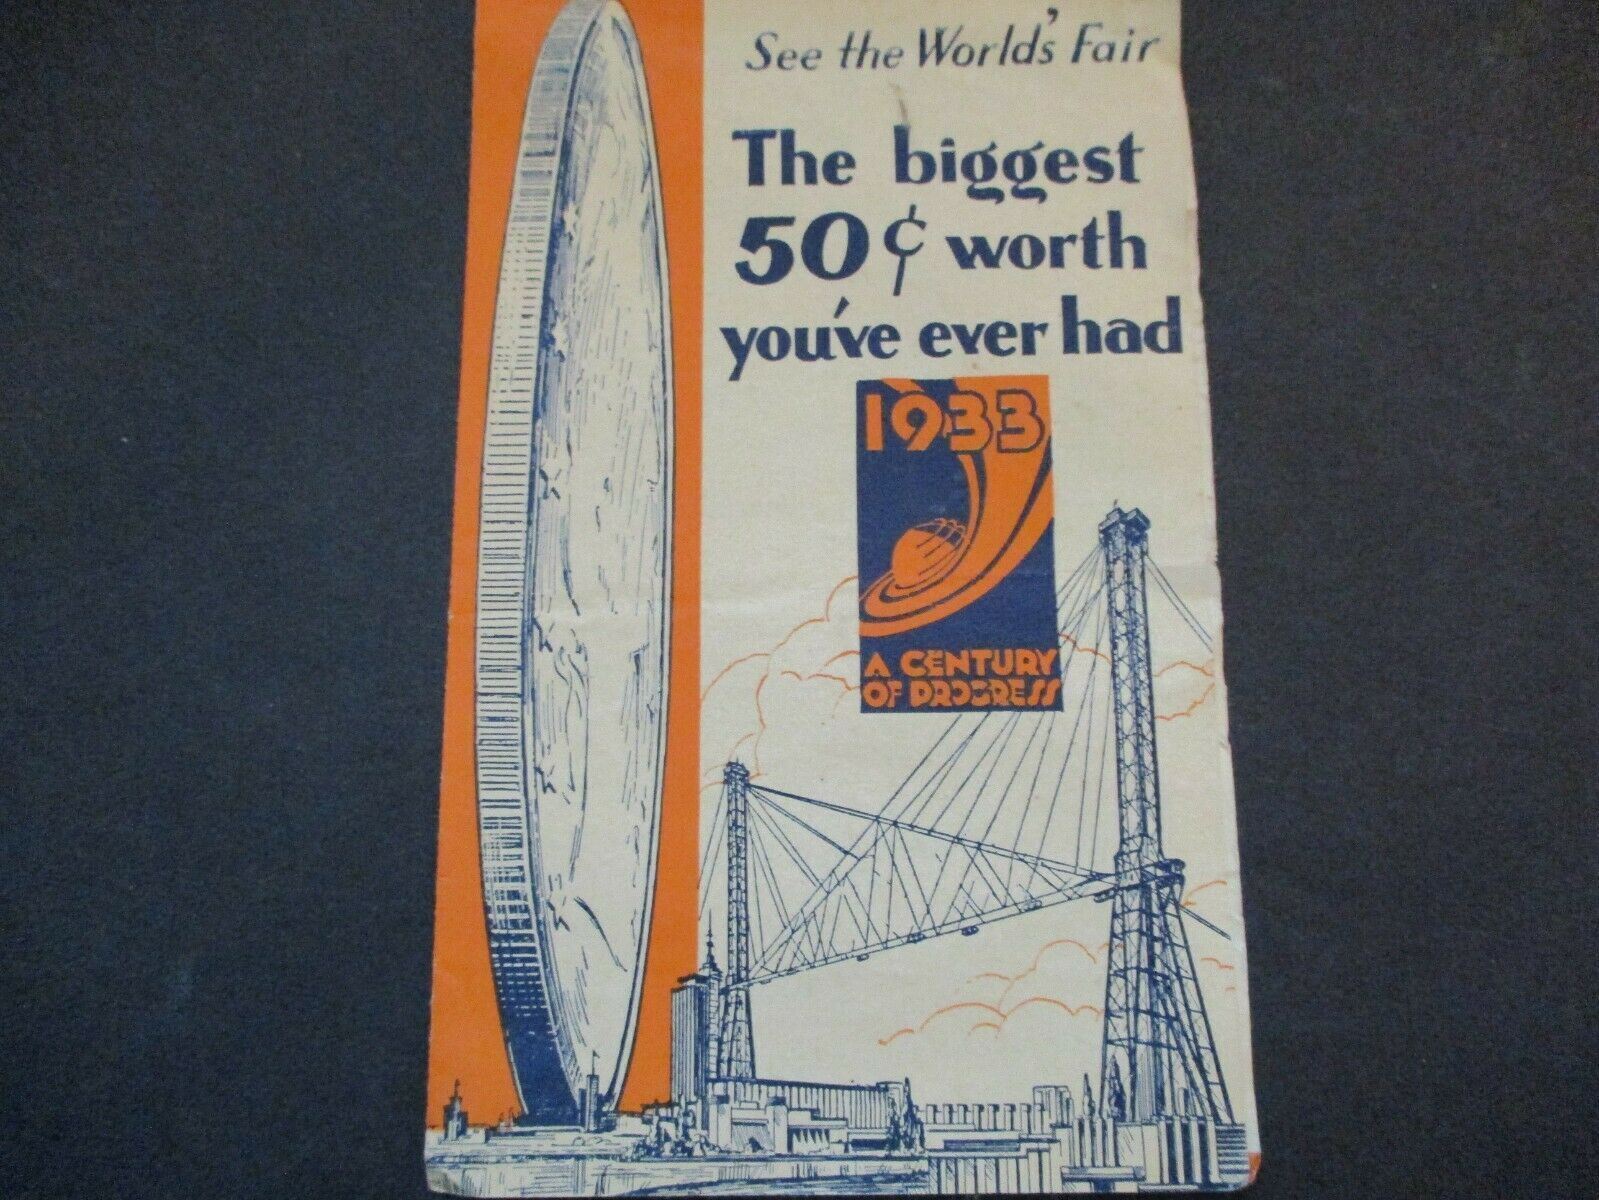 See The World's Fair The Biggest 50 cent Worth You've Ever Had brochure